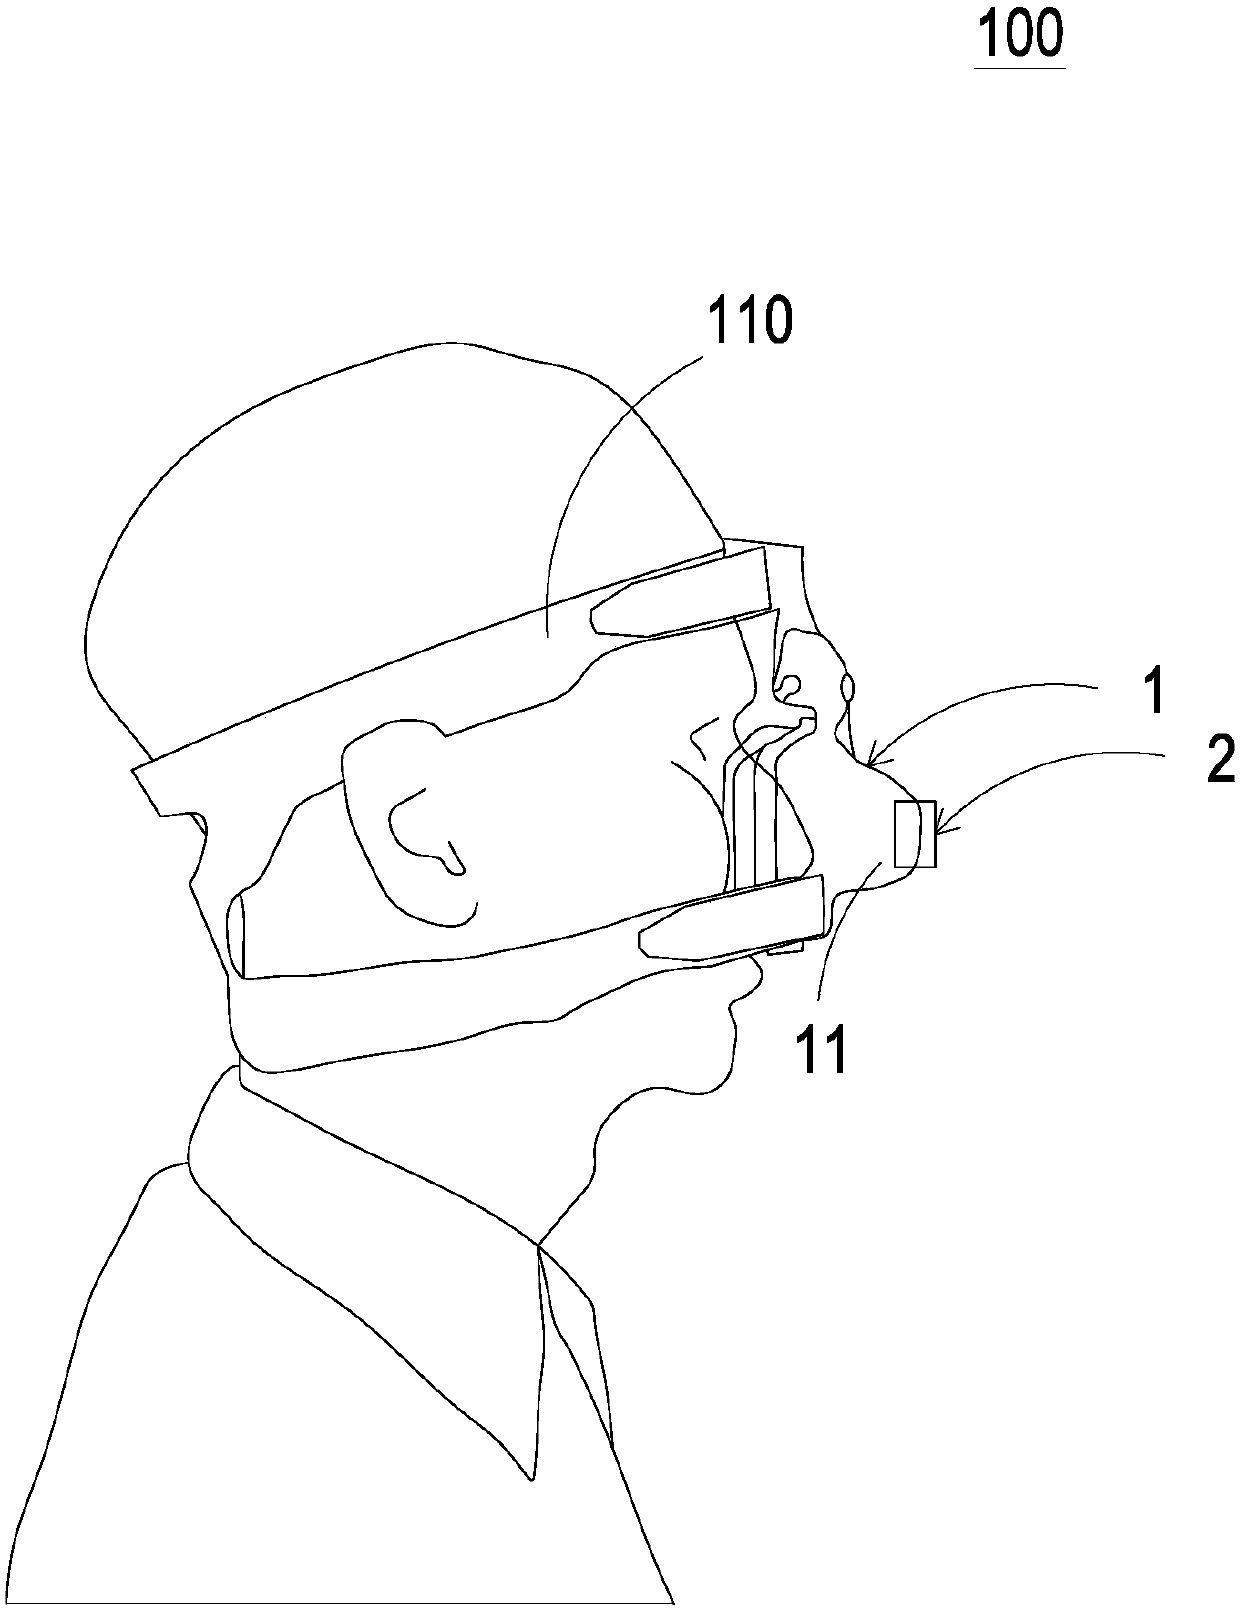 Positive pressure breathing device